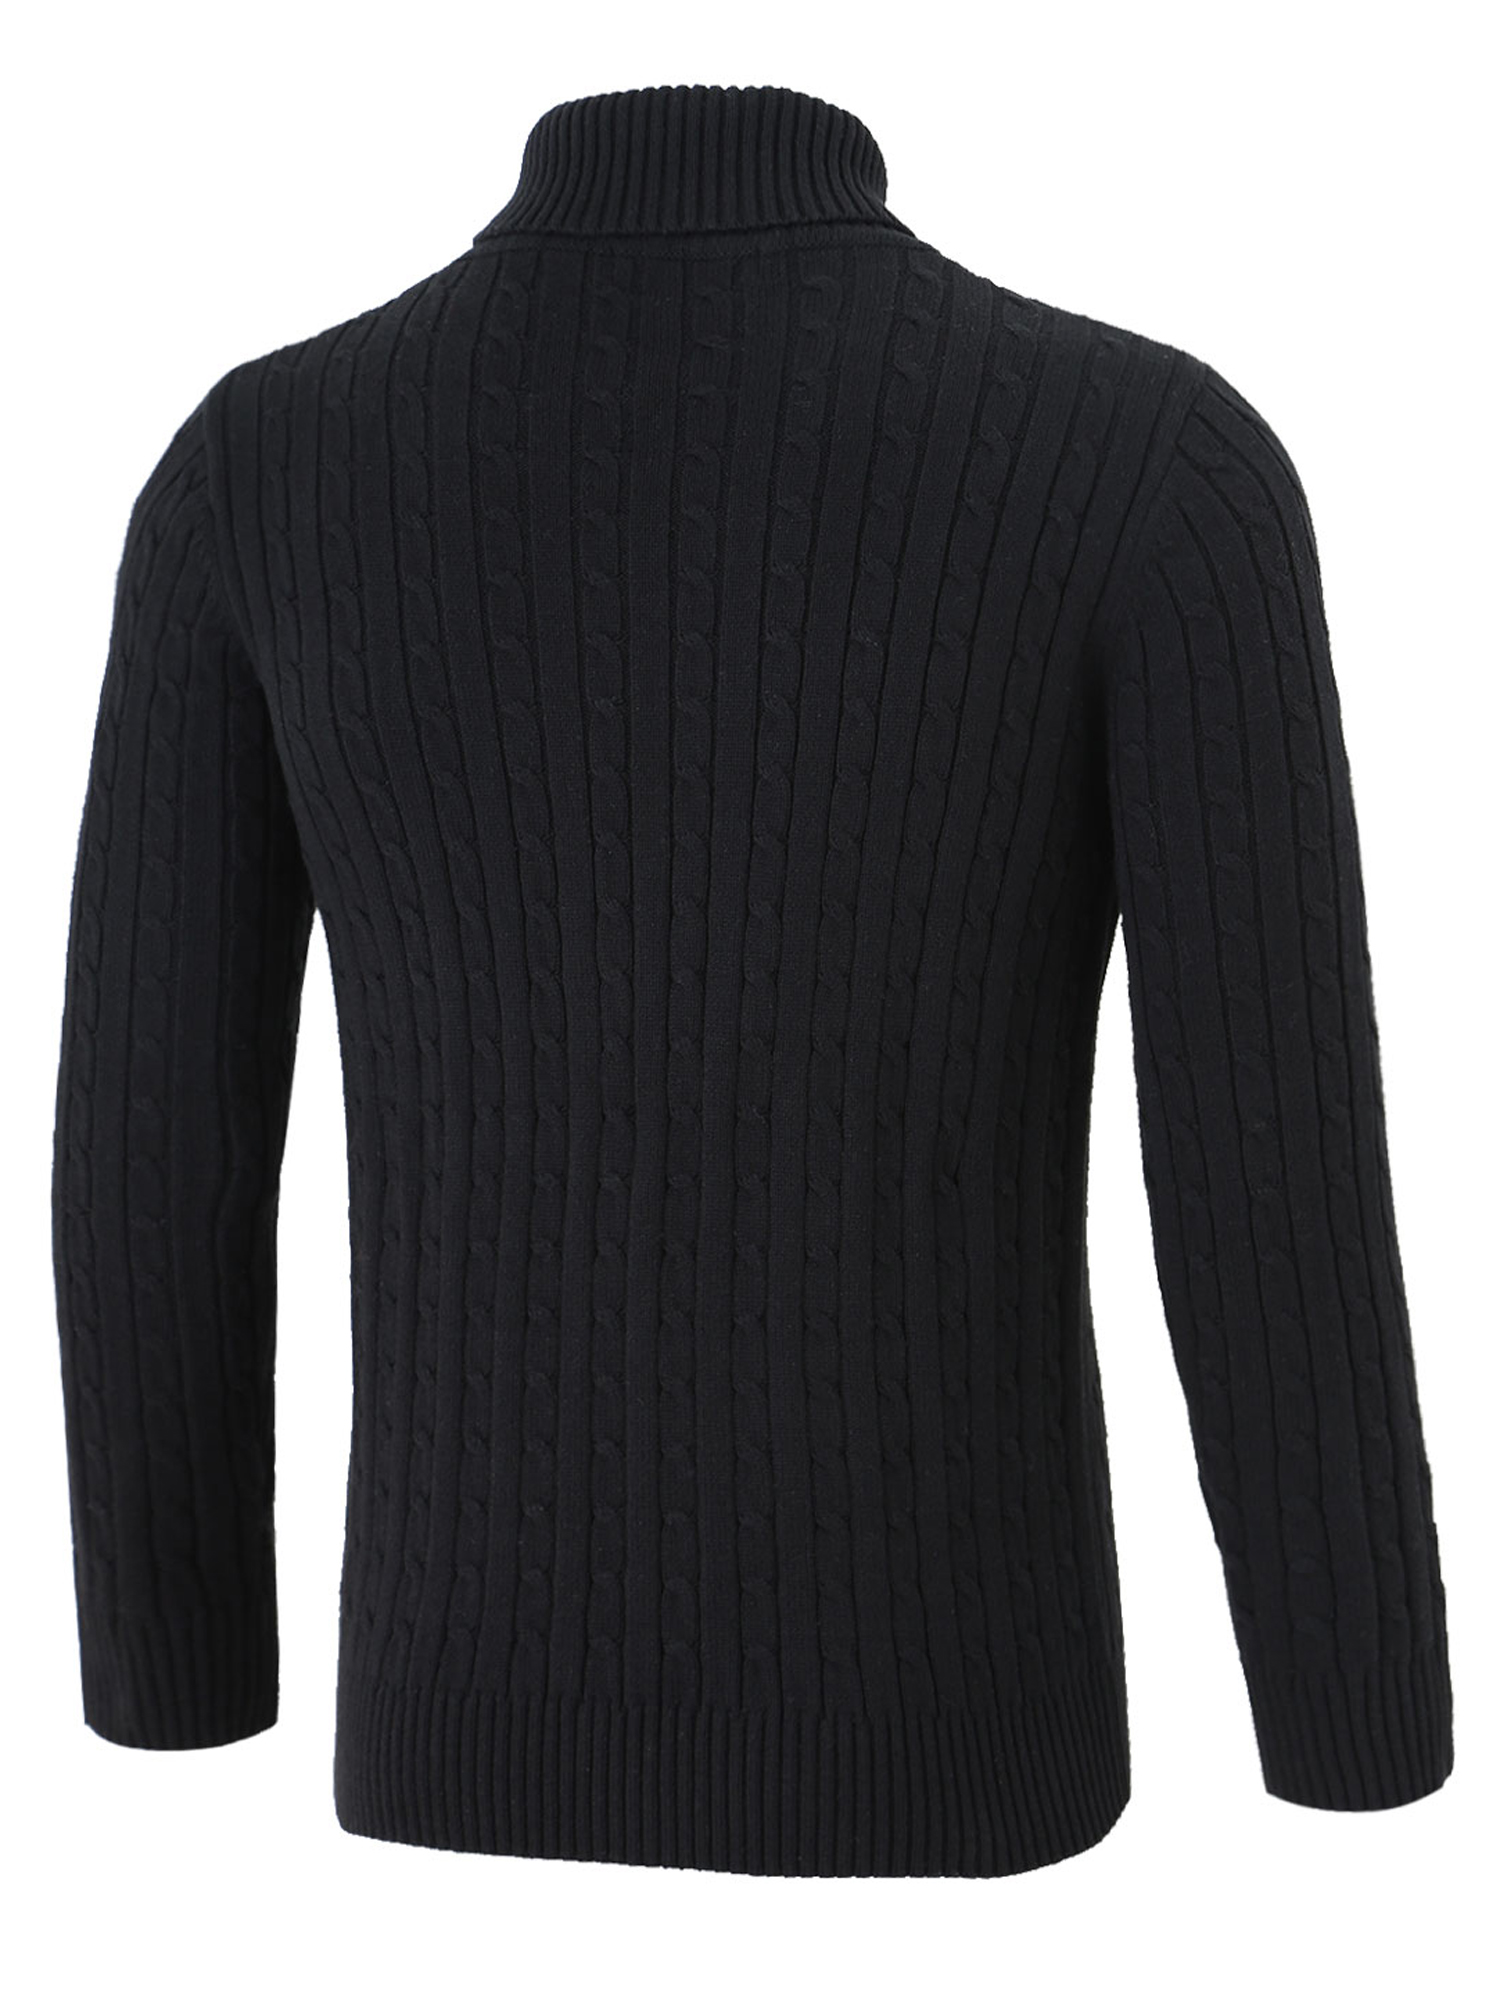 Unique Bargains Men's Turtleneck Long Sleeves Pullover Cable Knit Sweater - image 3 of 7